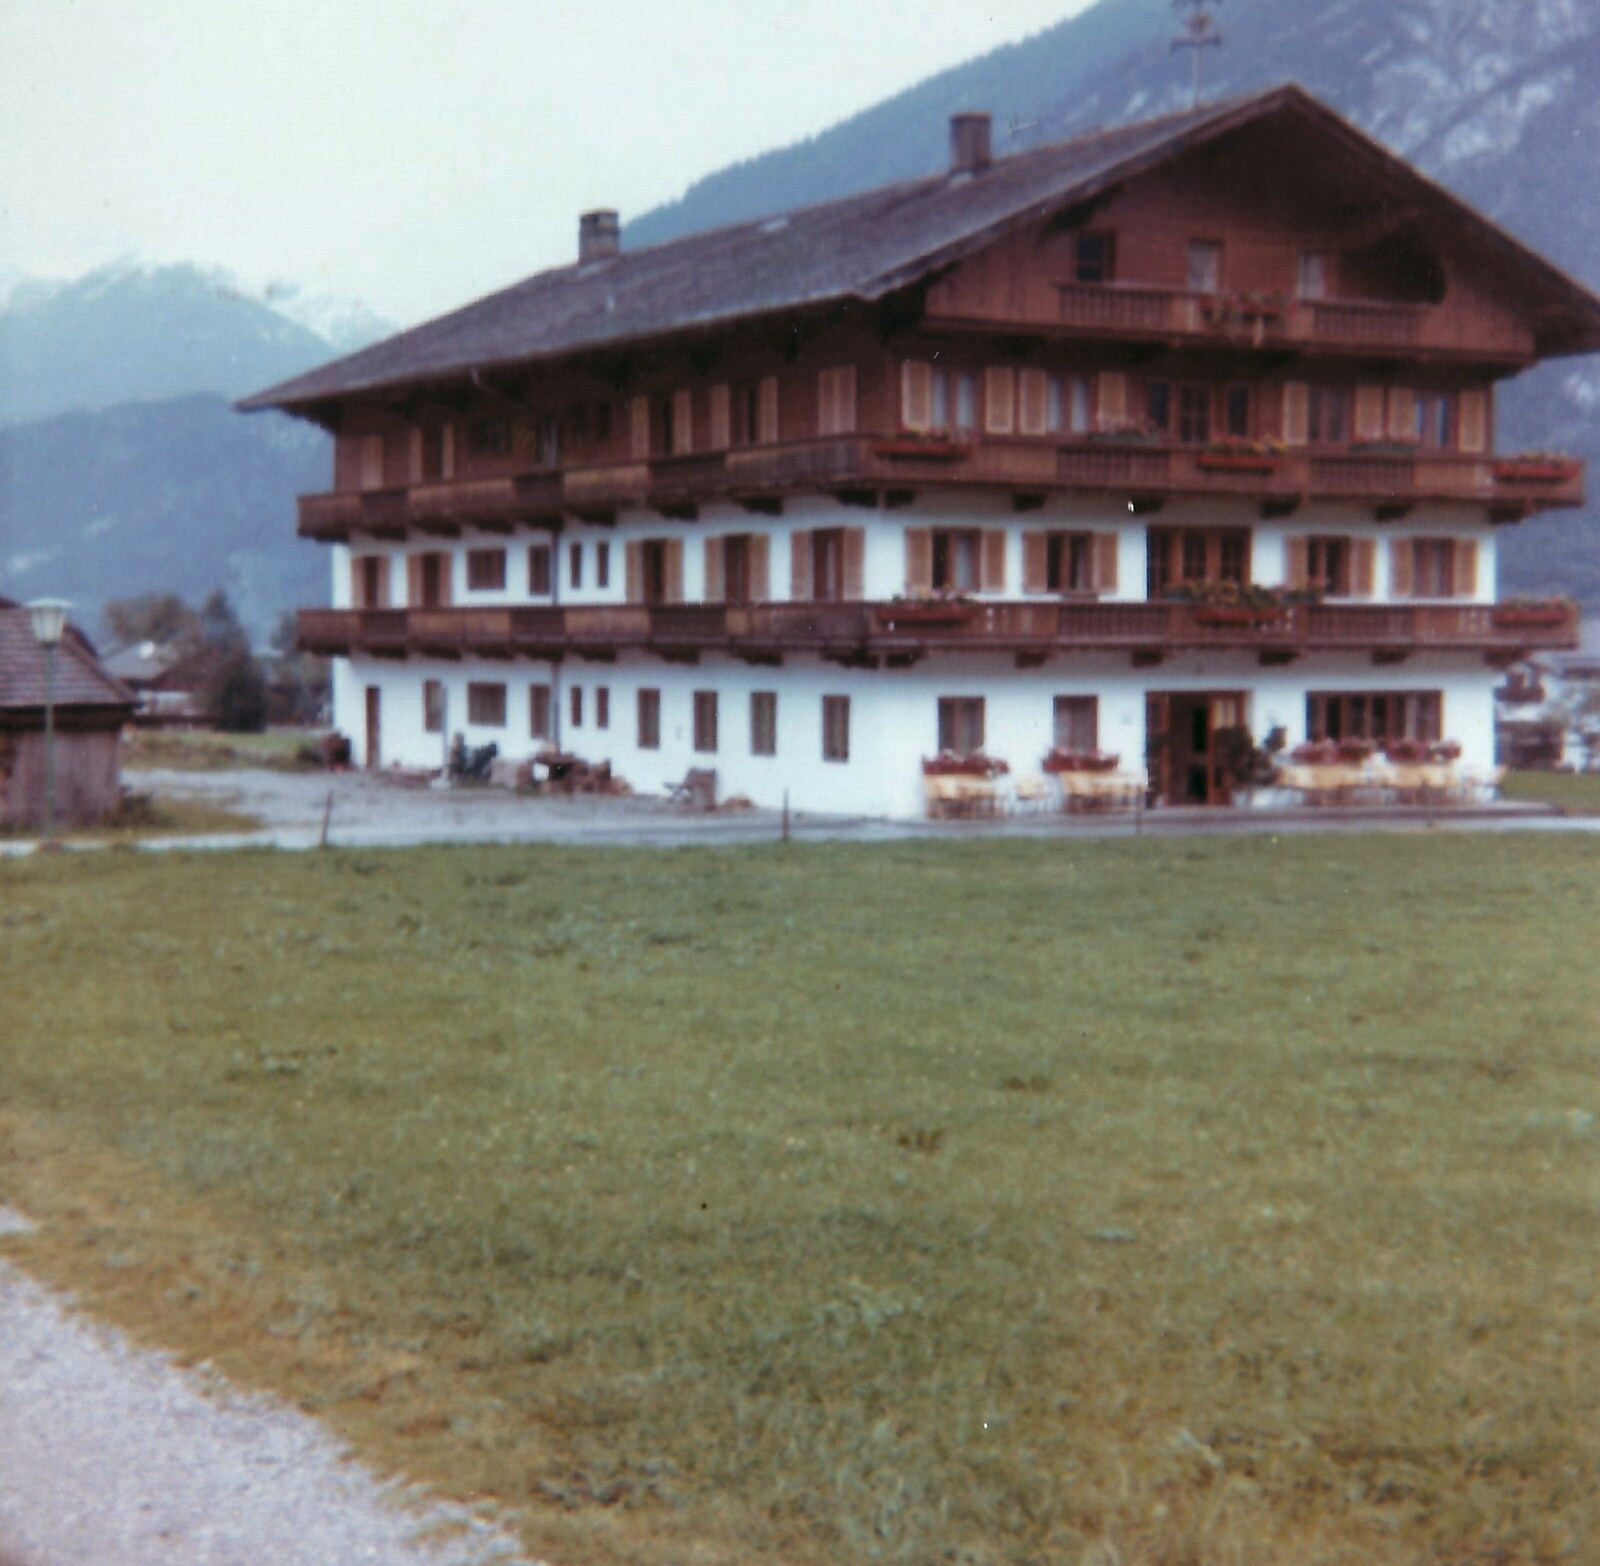 Family History: The 1960s - 24th January 2020: A Swiss chalet